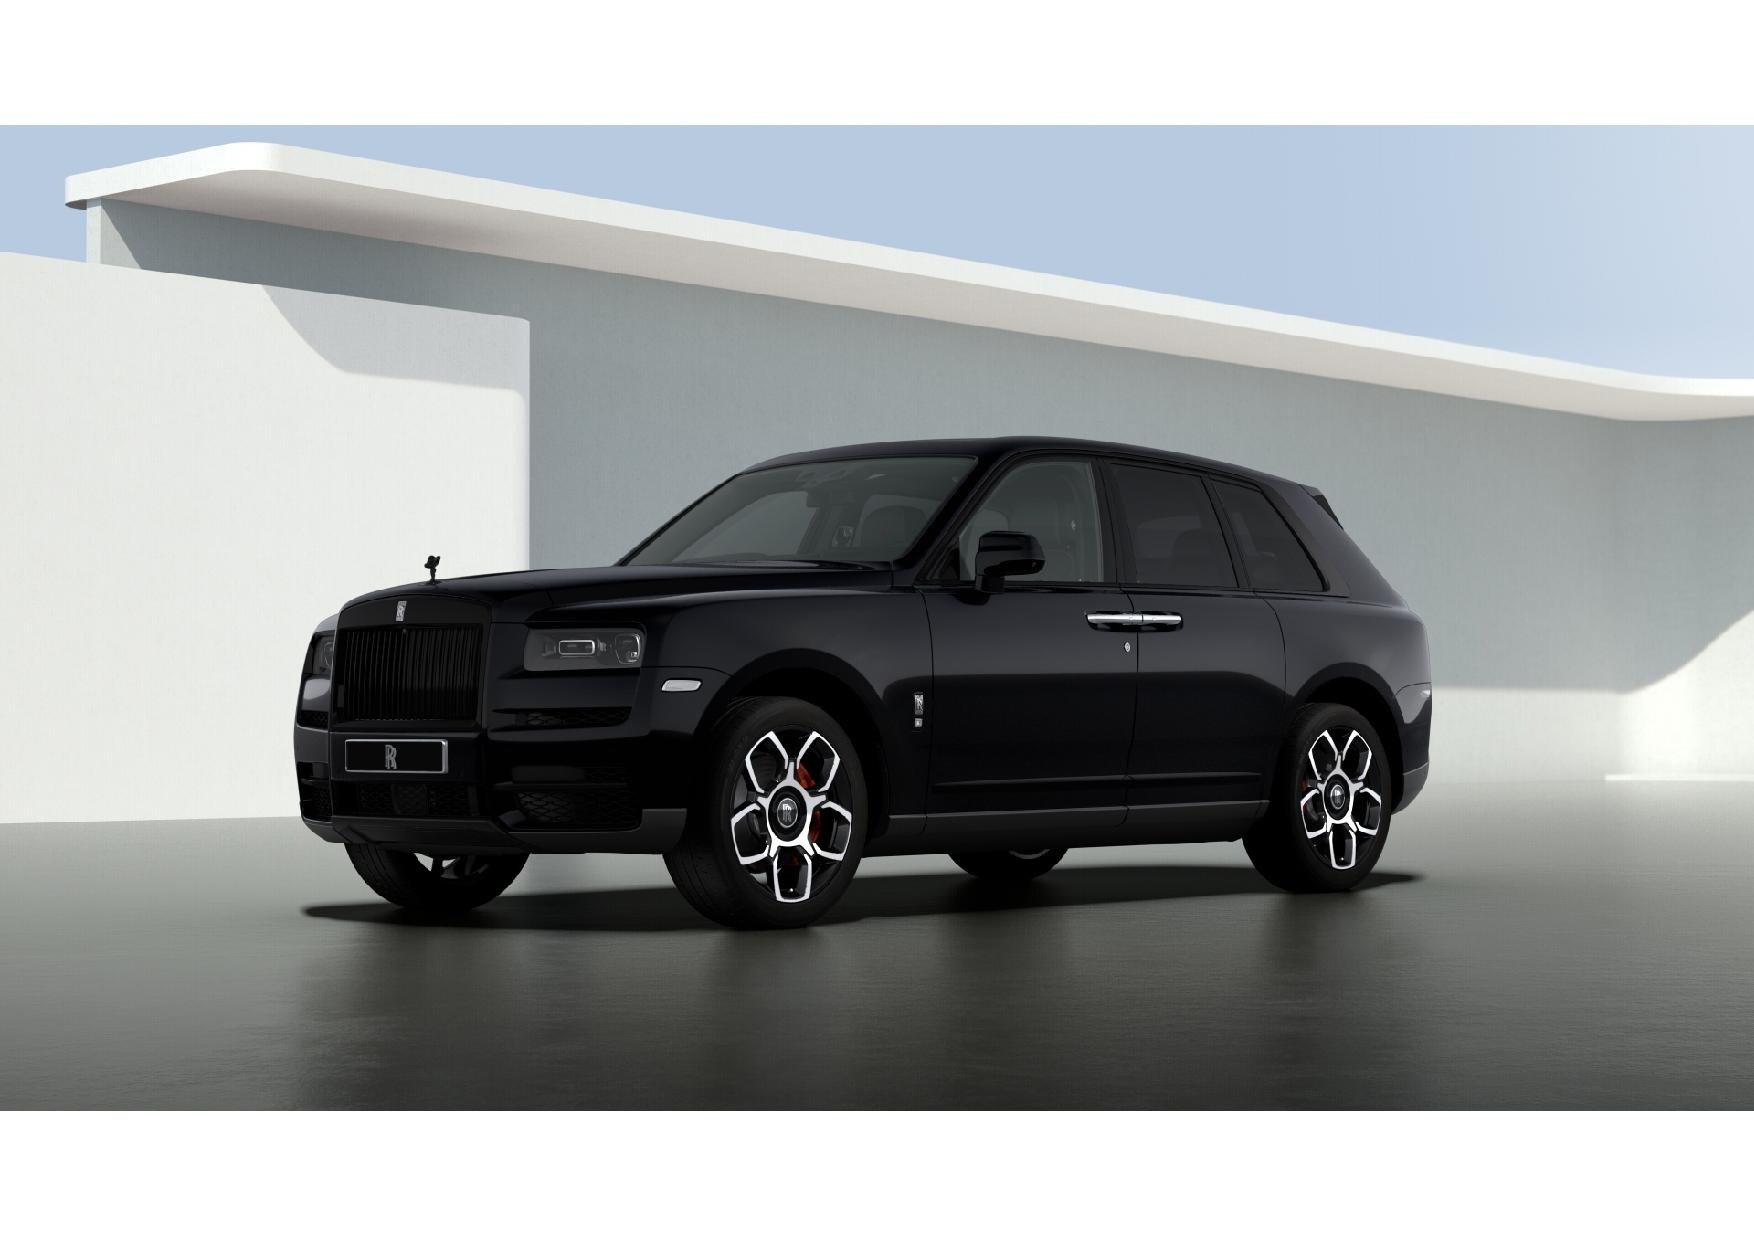 New 2023 Rolls-Royce Black Badge Cullinan for sale Call for price at Bentley Greenwich in Greenwich CT 06830 1